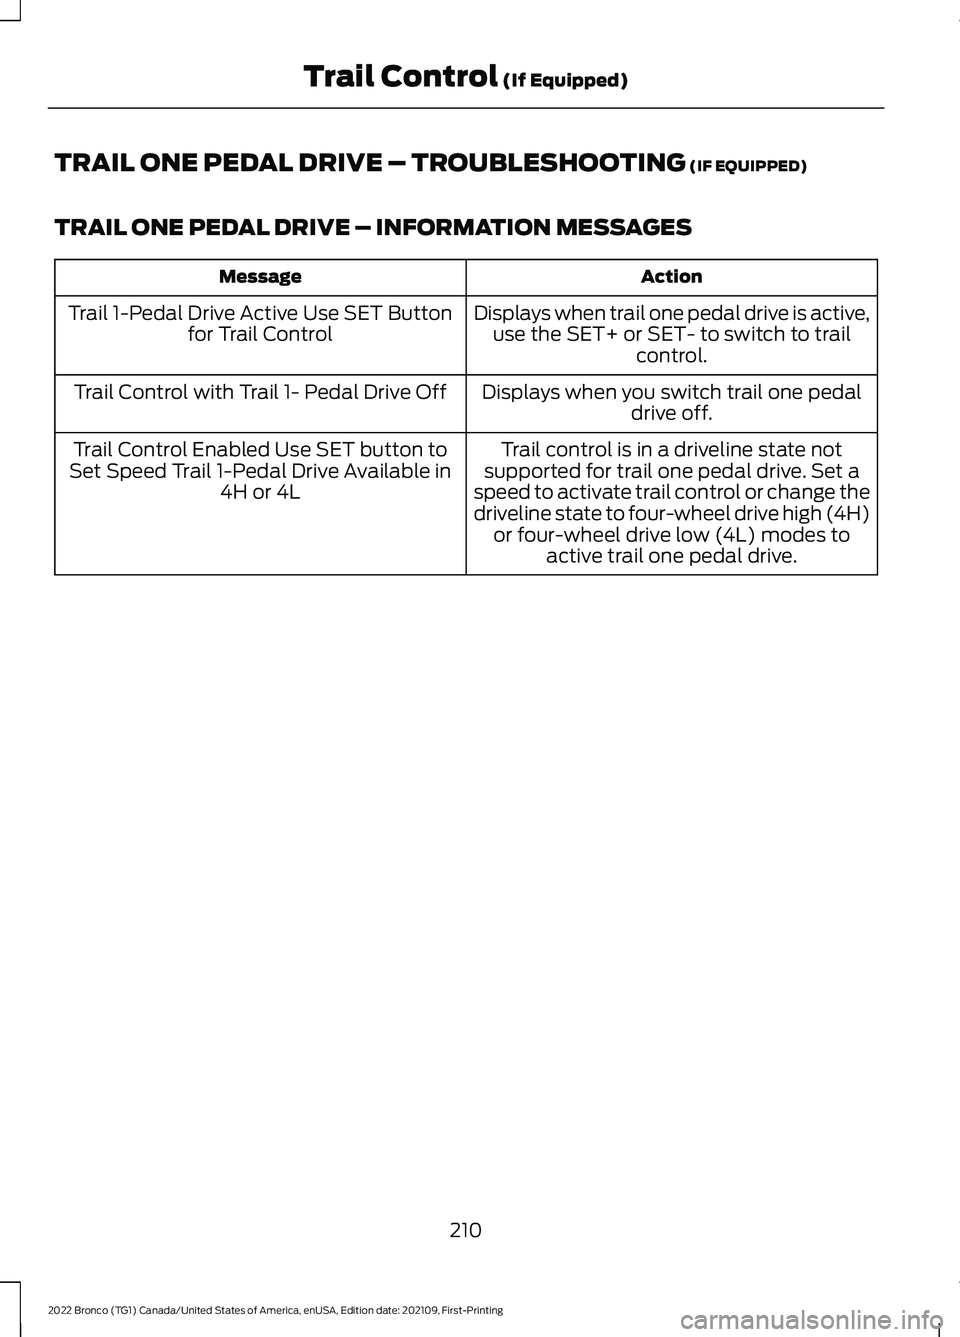 FORD BRONCO 2022 Owners Manual TRAIL ONE PEDAL DRIVE – TROUBLESHOOTING (IF EQUIPPED)
TRAIL ONE PEDAL DRIVE – INFORMATION MESSAGES
ActionMessage
Displays when trail one pedal drive is active,use the SET+ or SET- to switch to tra